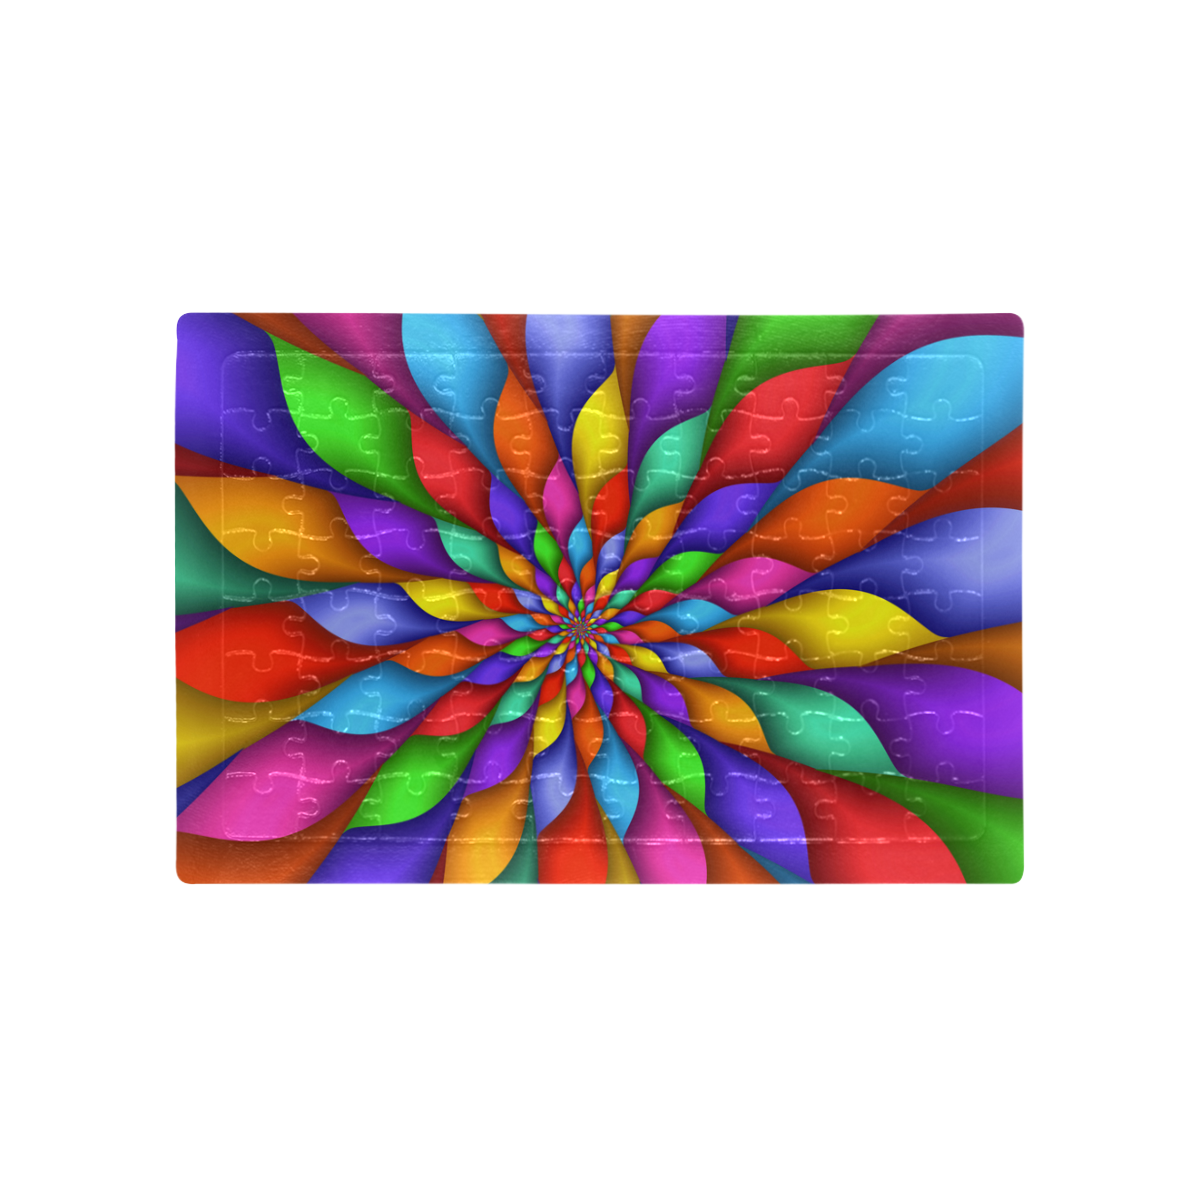 Psychedelic Rainbow Petal Spiral Puzzle A4 Size Jigsaw Puzzle (Set of 80 Pieces)